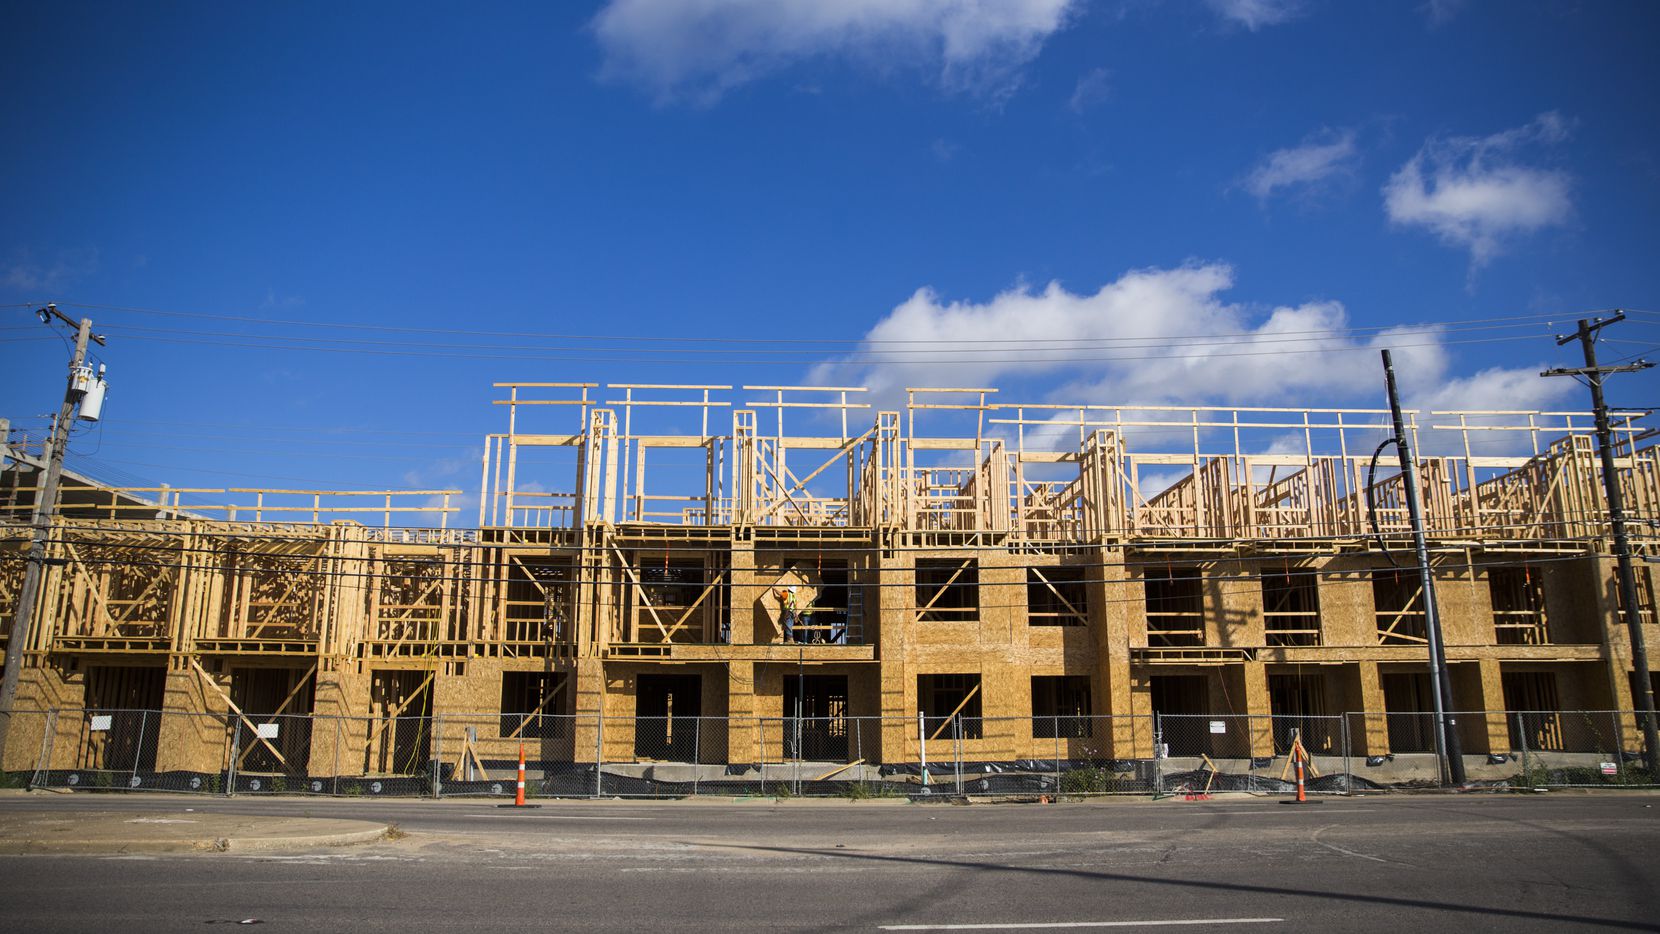 More than 35,000 apartments are under construction in North Texas.